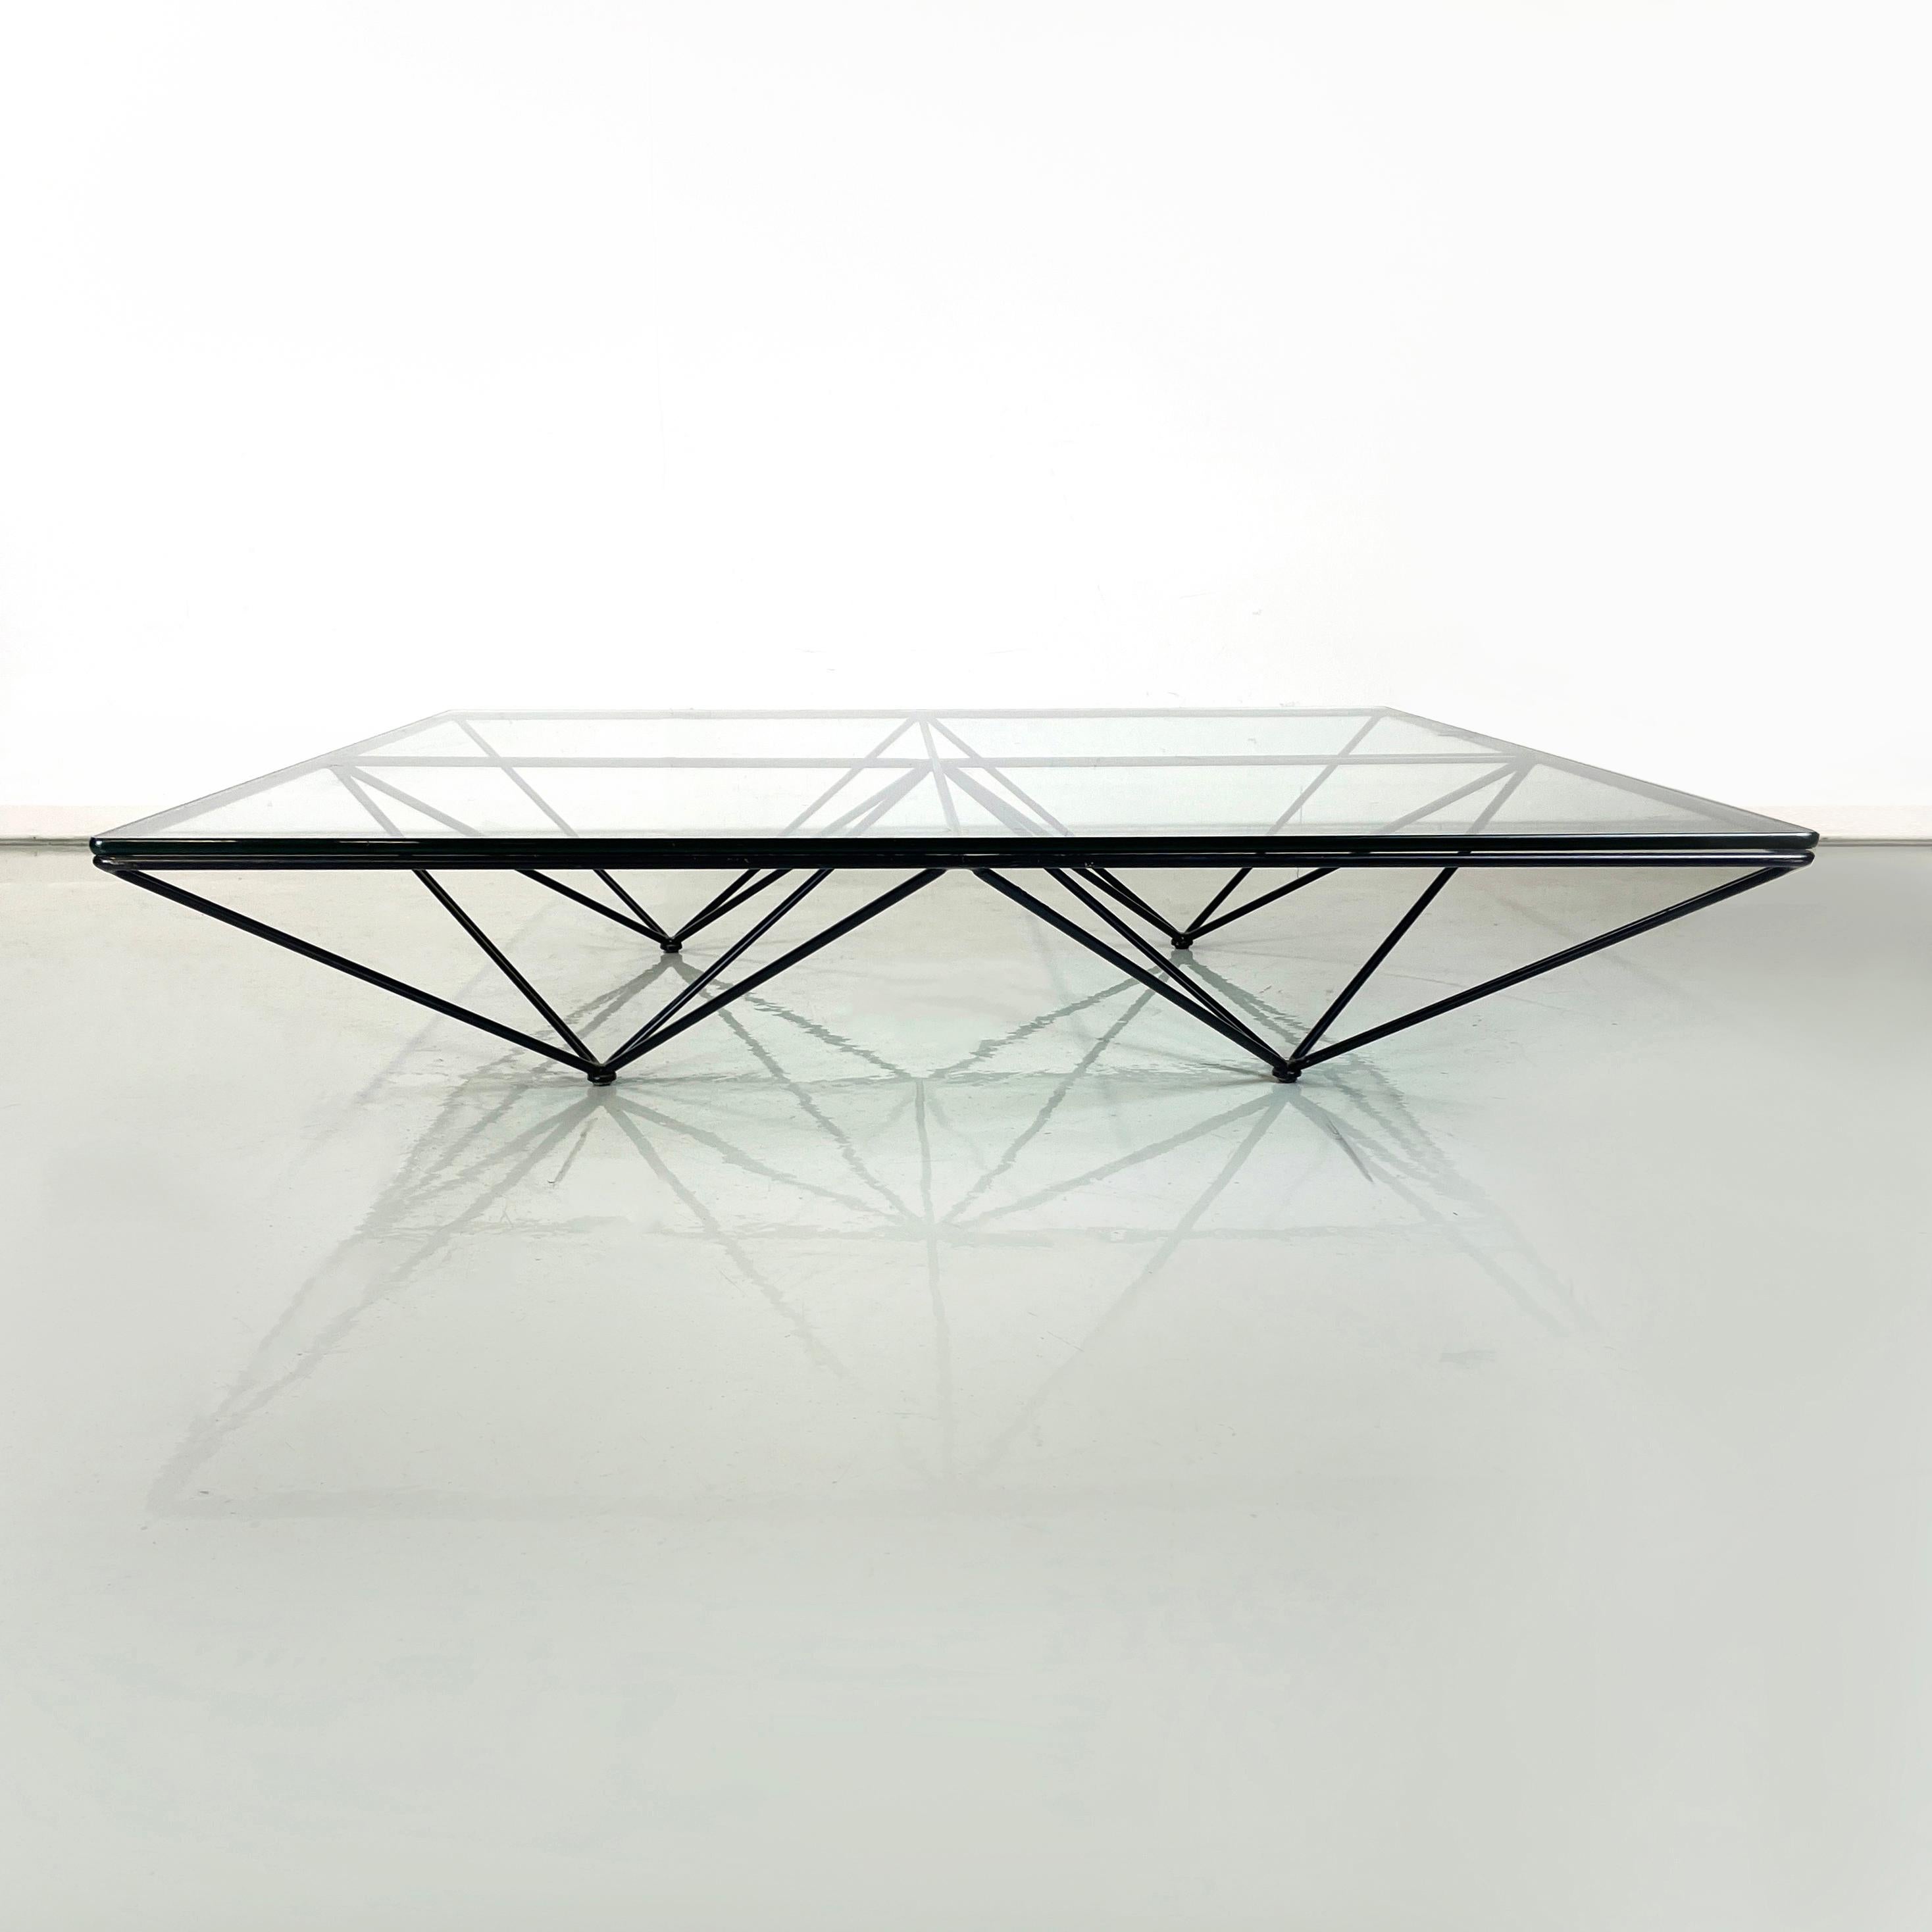 Italian modern Black metal and glass Coffee table Alanda by Paolo Piva for B&B, 1980s
Coffee table mod. Alanda with square top in transparent glass. The structure is made up of a series of black painted metal rods.
Produced by B&B Italia in approx.